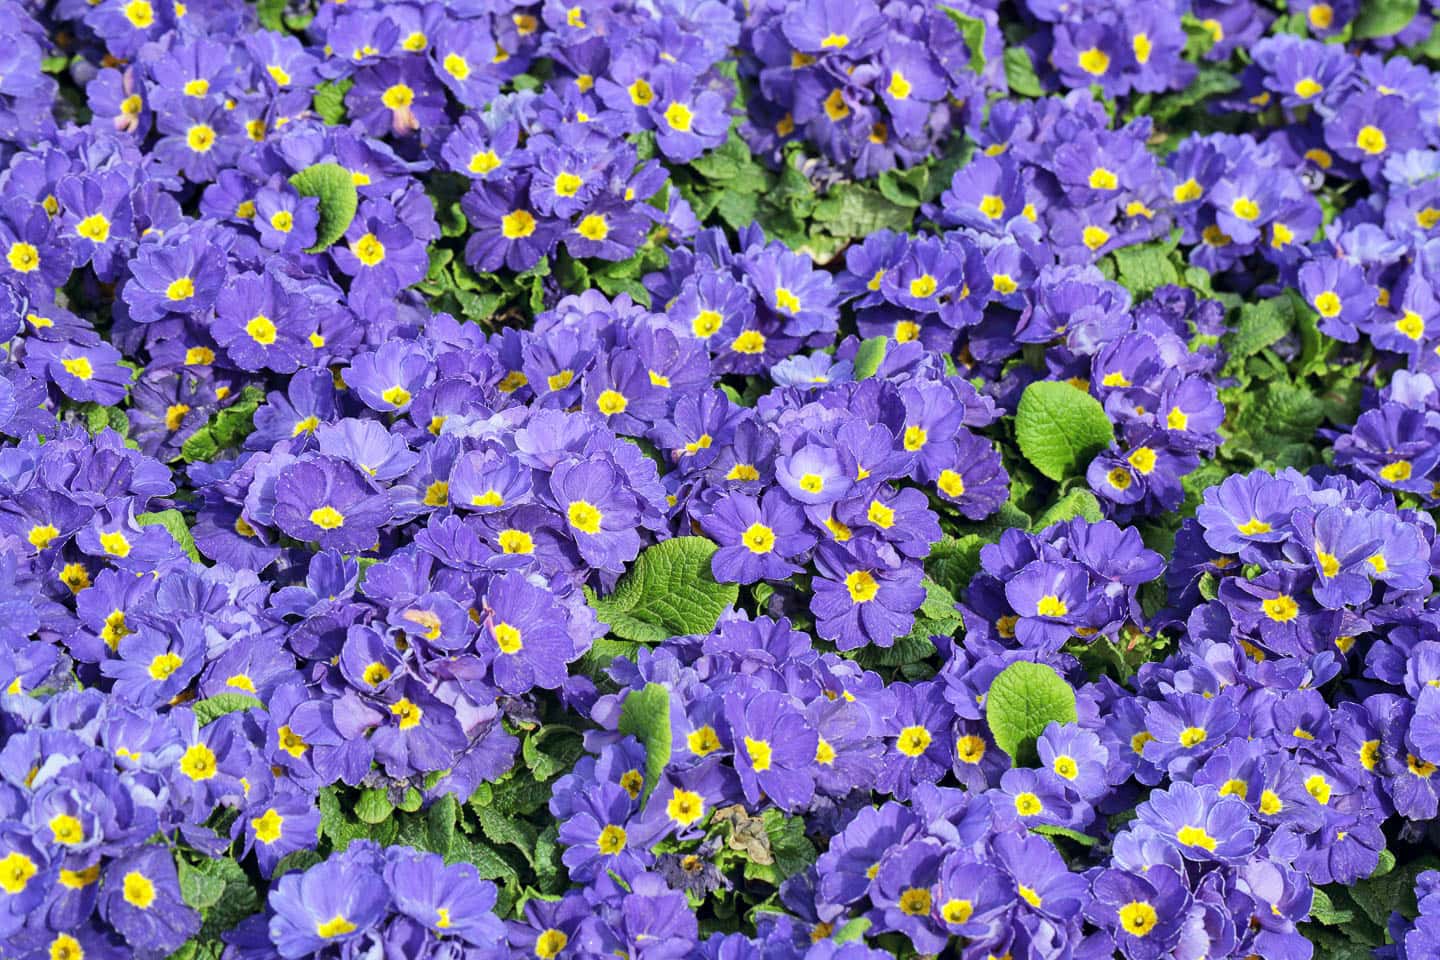 early spring annual purple primrose flowers with yellow centers